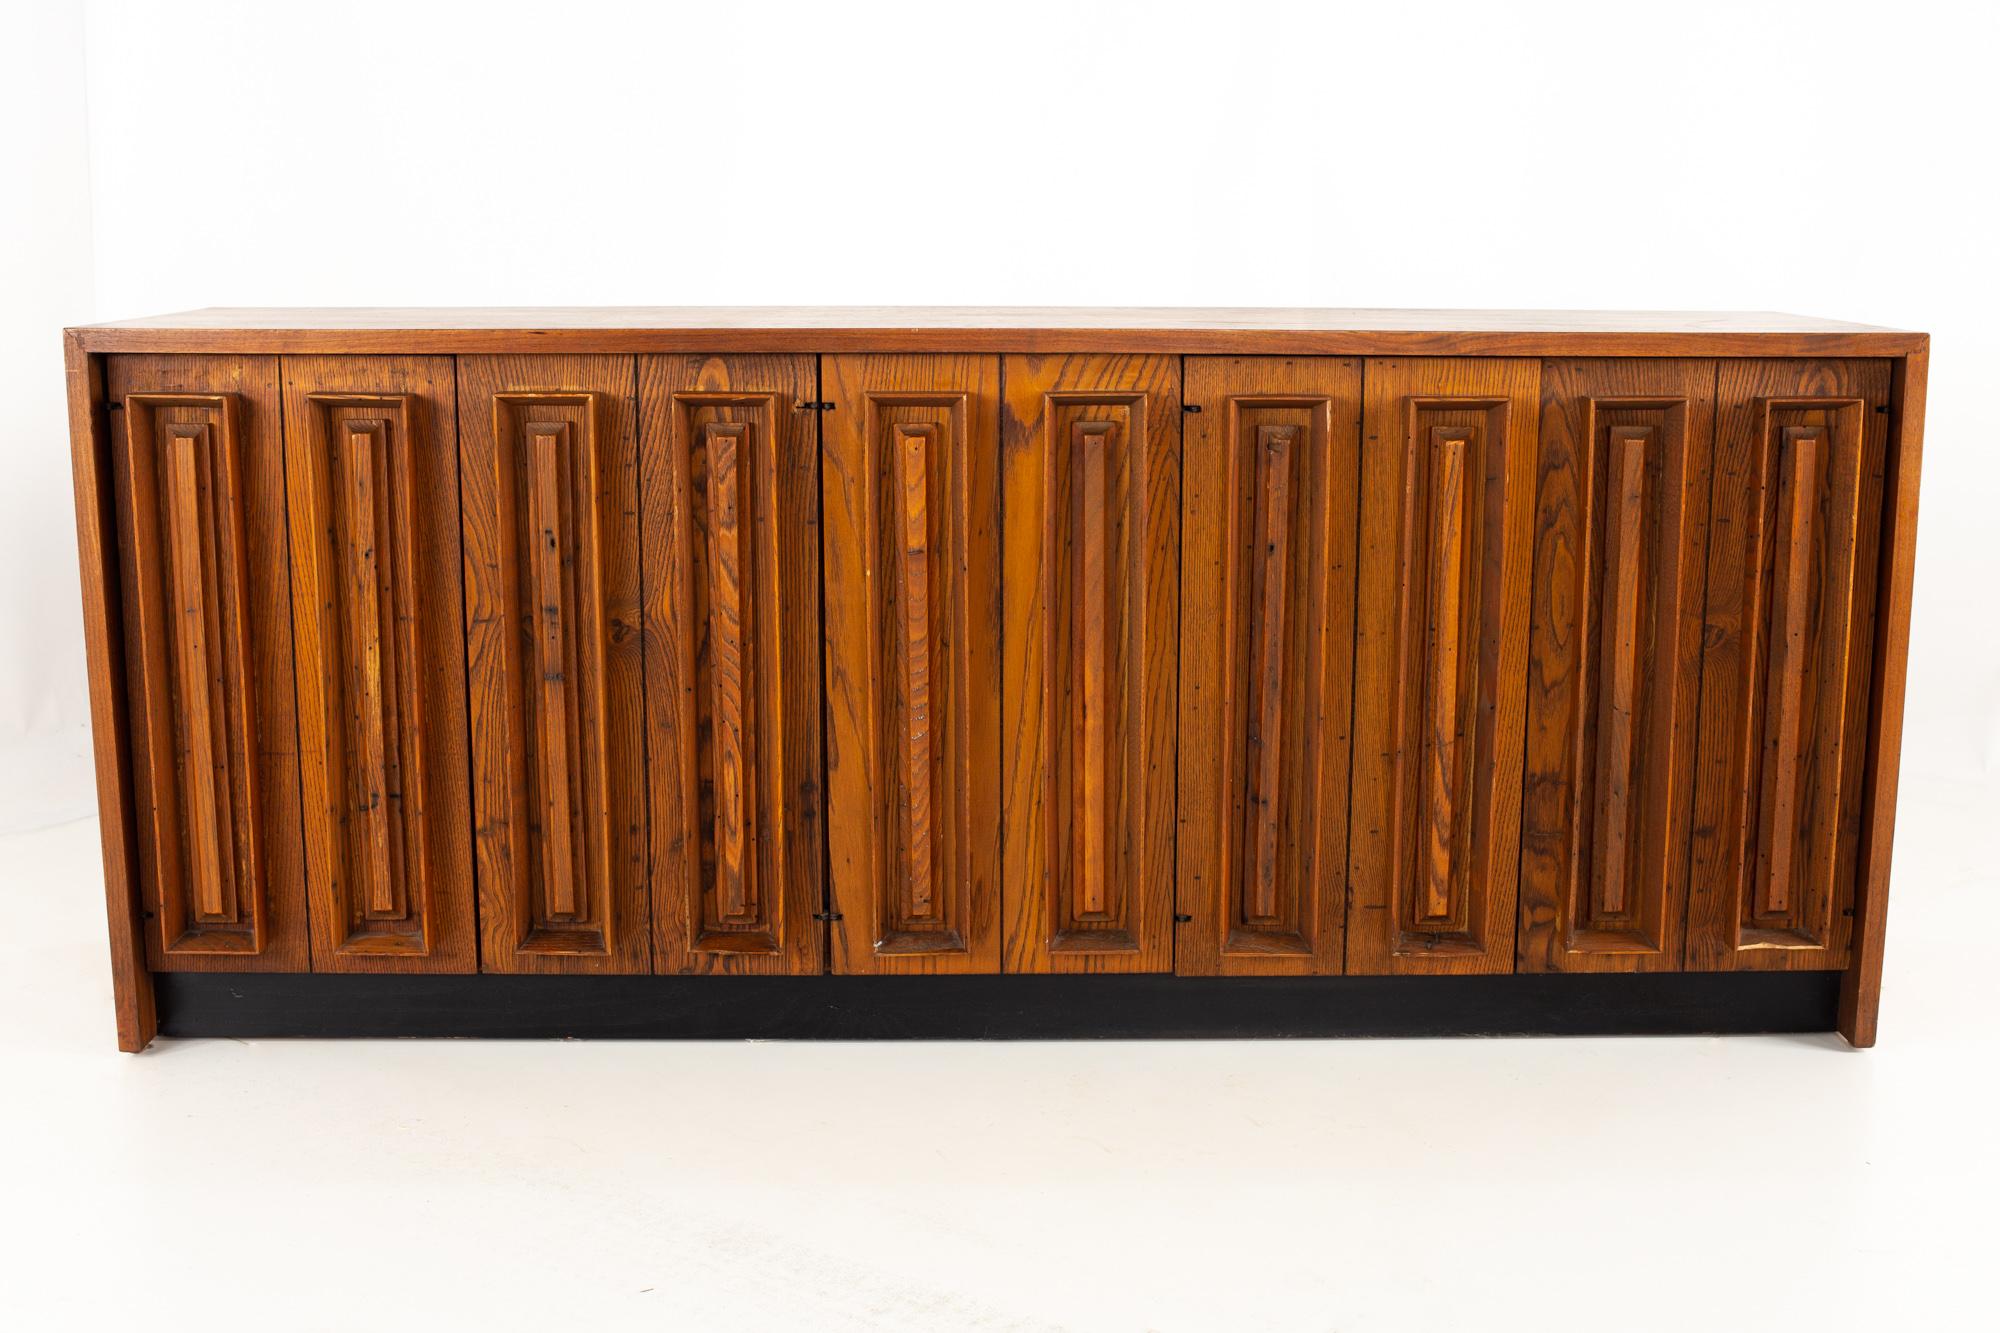 Dillingham midcentury pecky cypress and walnut sideboard credenza buffet

Measures: 74 wide x 19 deep x 30.5 high

This price includes getting this piece in what we call restored vintage condition. That means the piece is permanently fixed upon